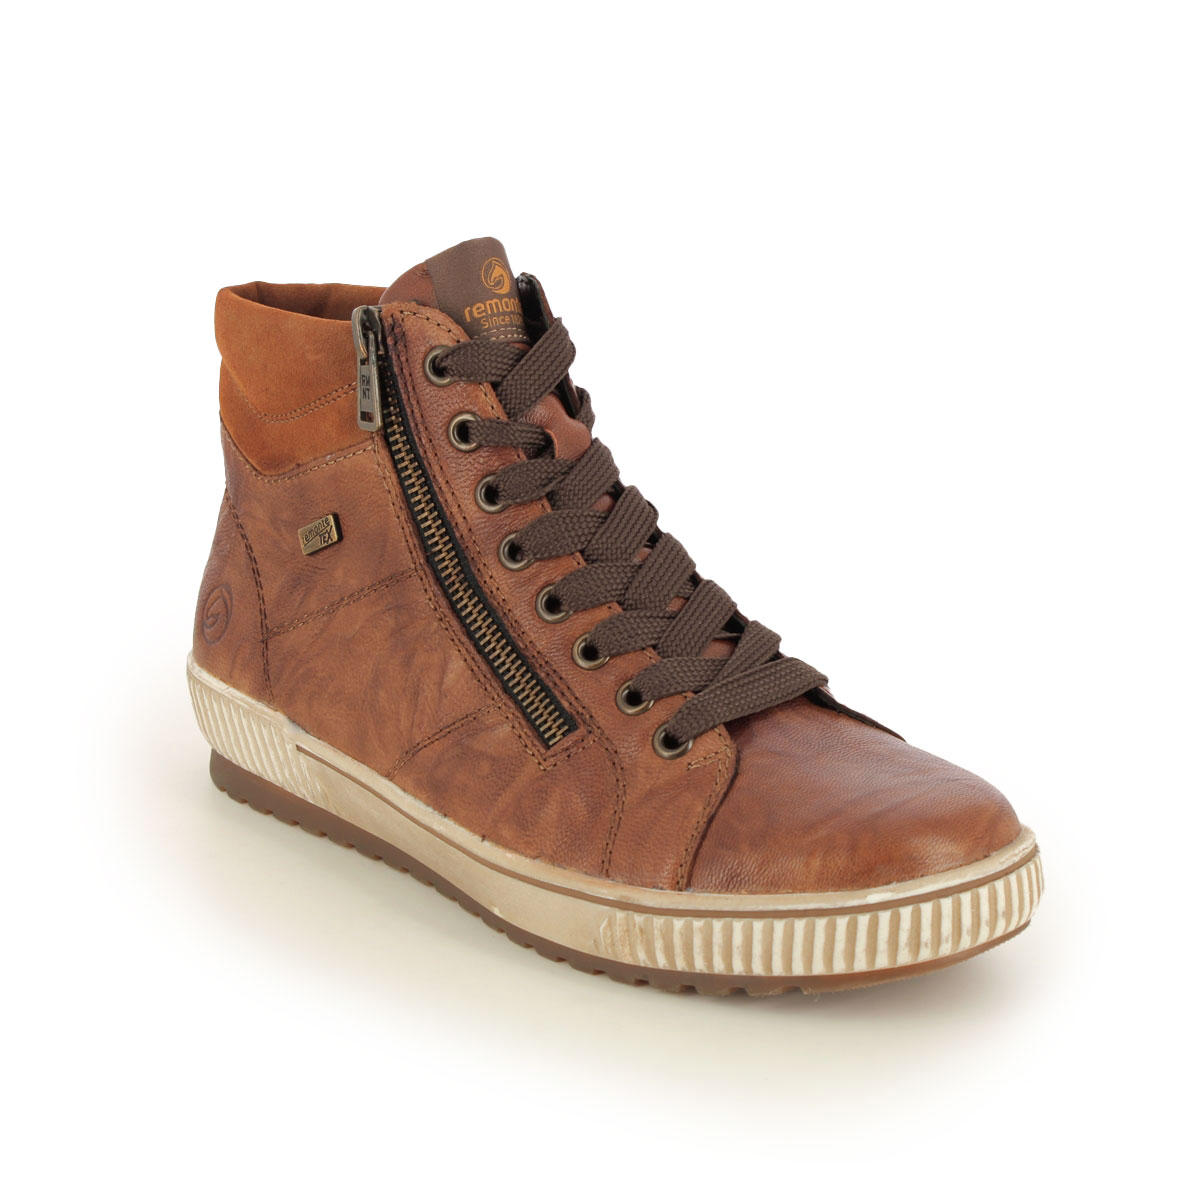 Remonte Tanaloto Tex Tan Leather  Womens Hi Tops D0772-22 In Size 38 In Plain Tan Leather